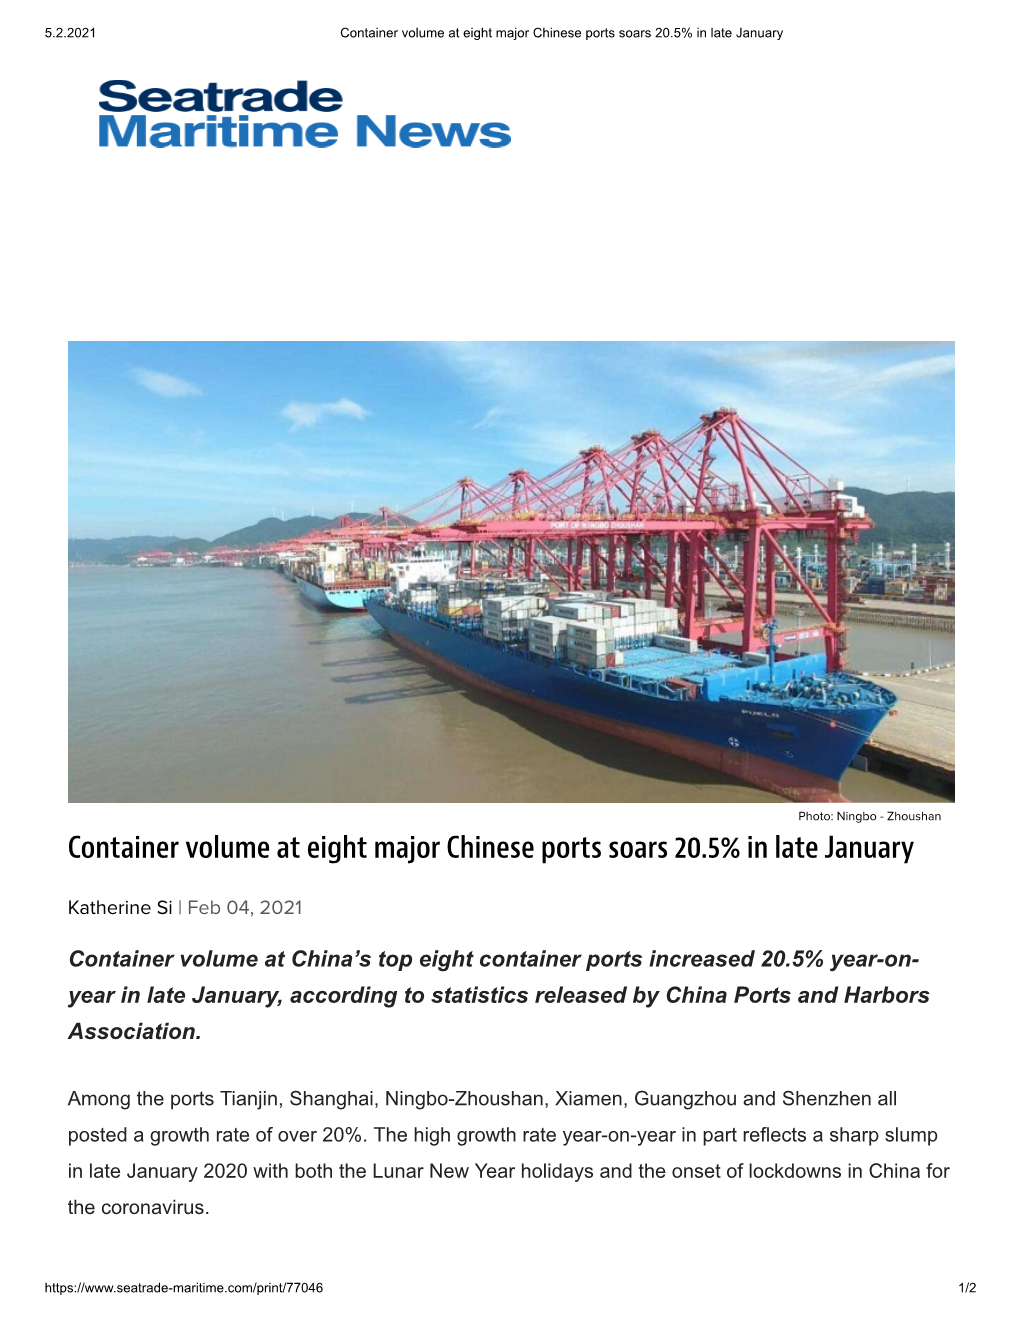 Container Volume at Eight Major Chinese Ports Soars 20.5% in Late January